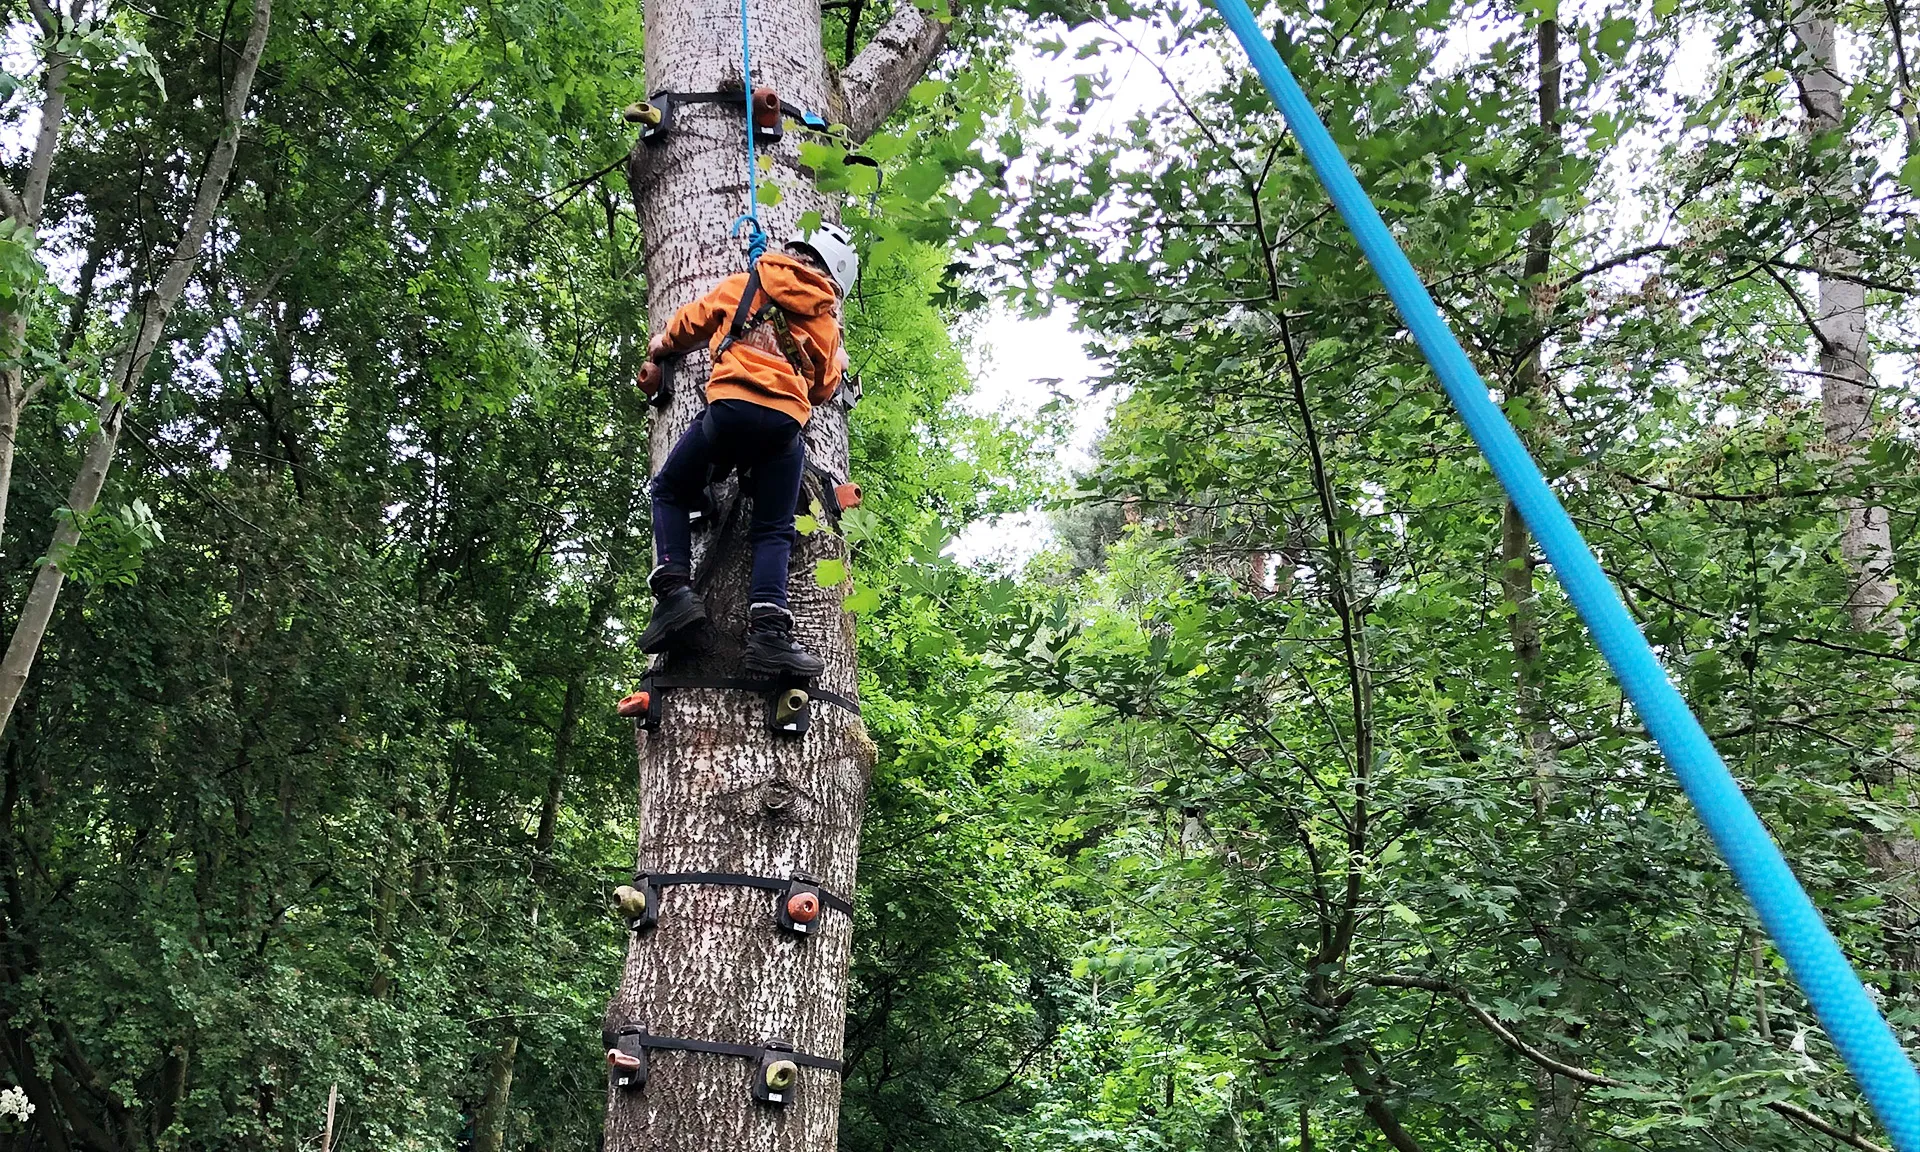 A child taking part in a climbing activity provided by We Are Adventurers.